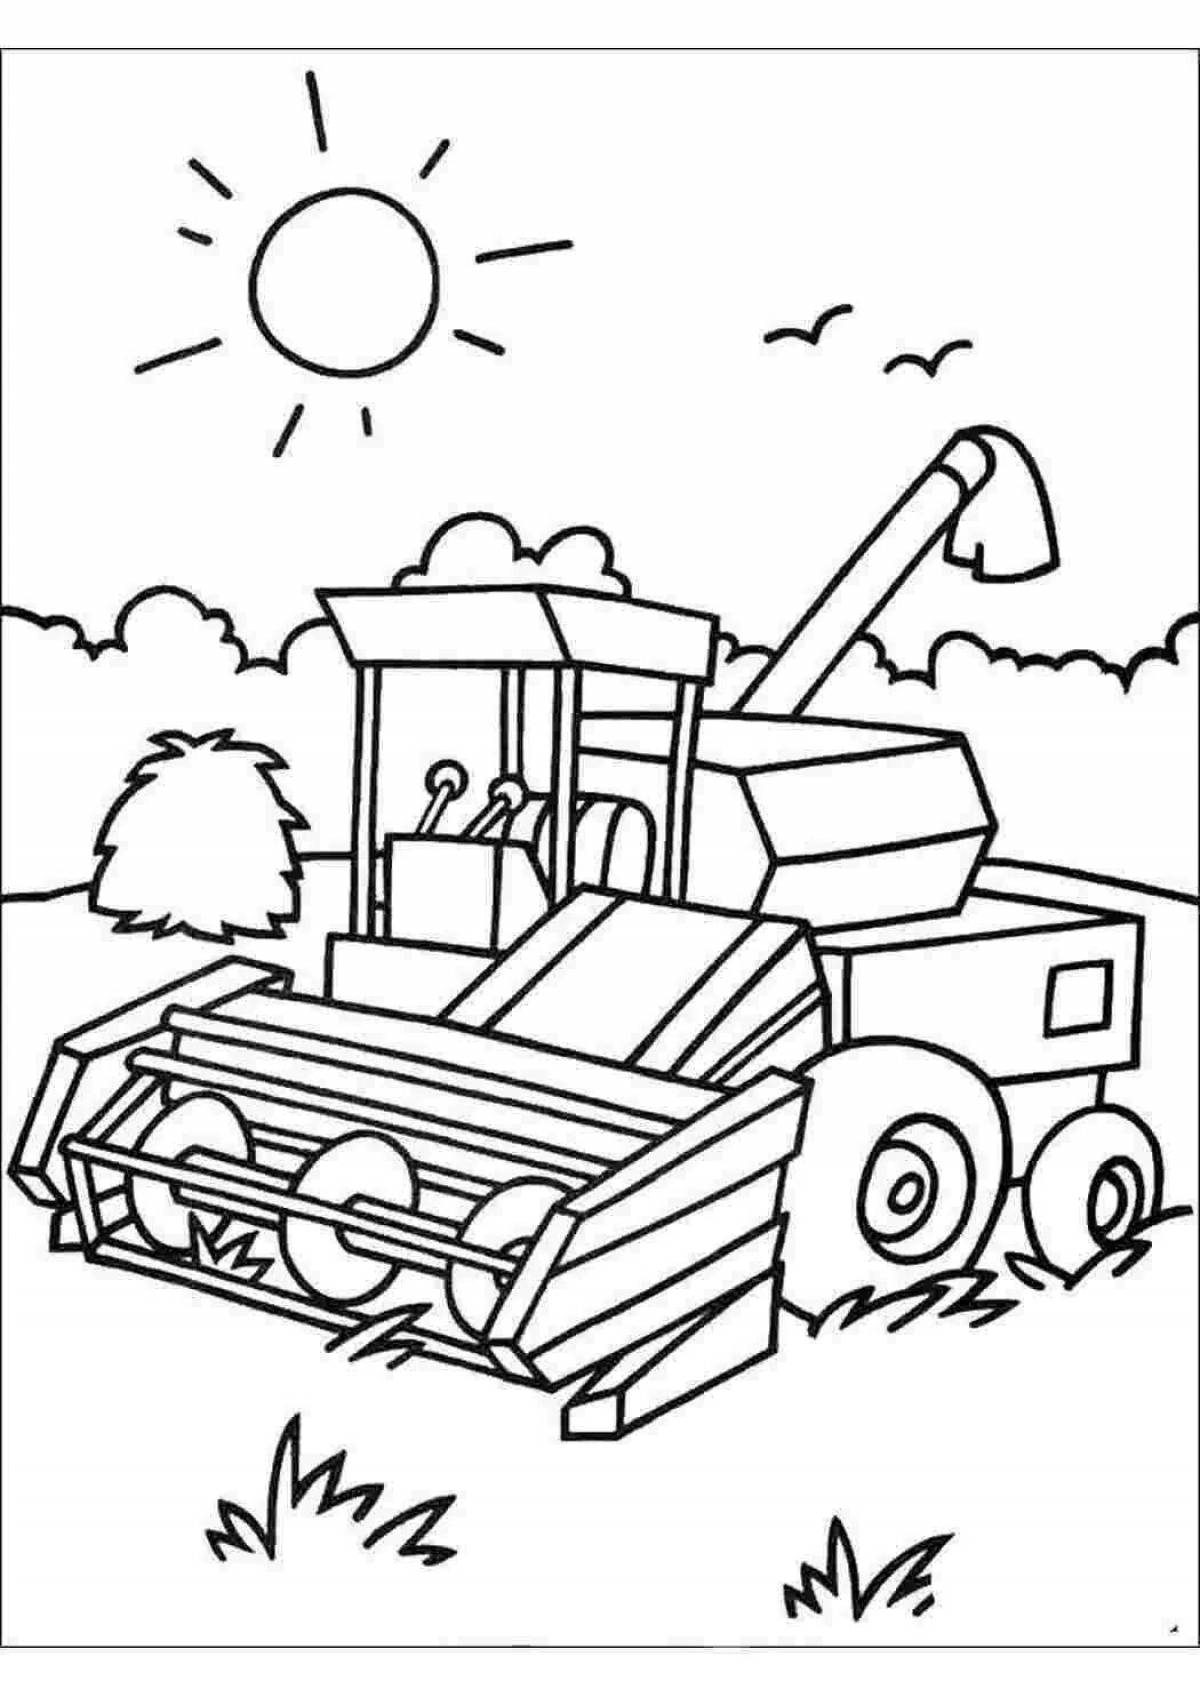 Adorable harvester coloring page for kids